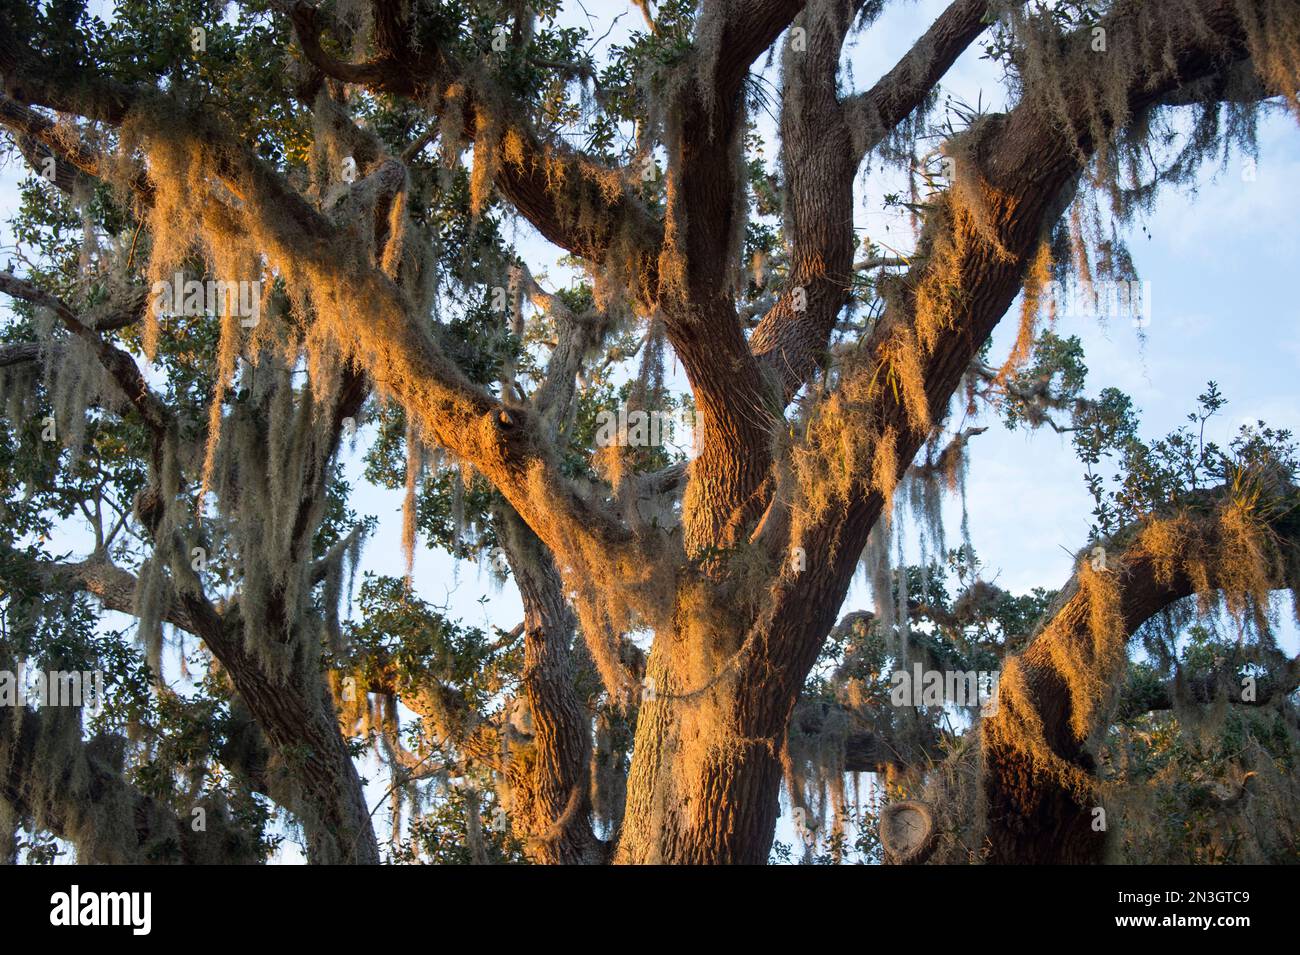 Spanish moss, an epiphytic plant, hangs in a live oak tree; Osprey, Florida, United States of America Stock Photo